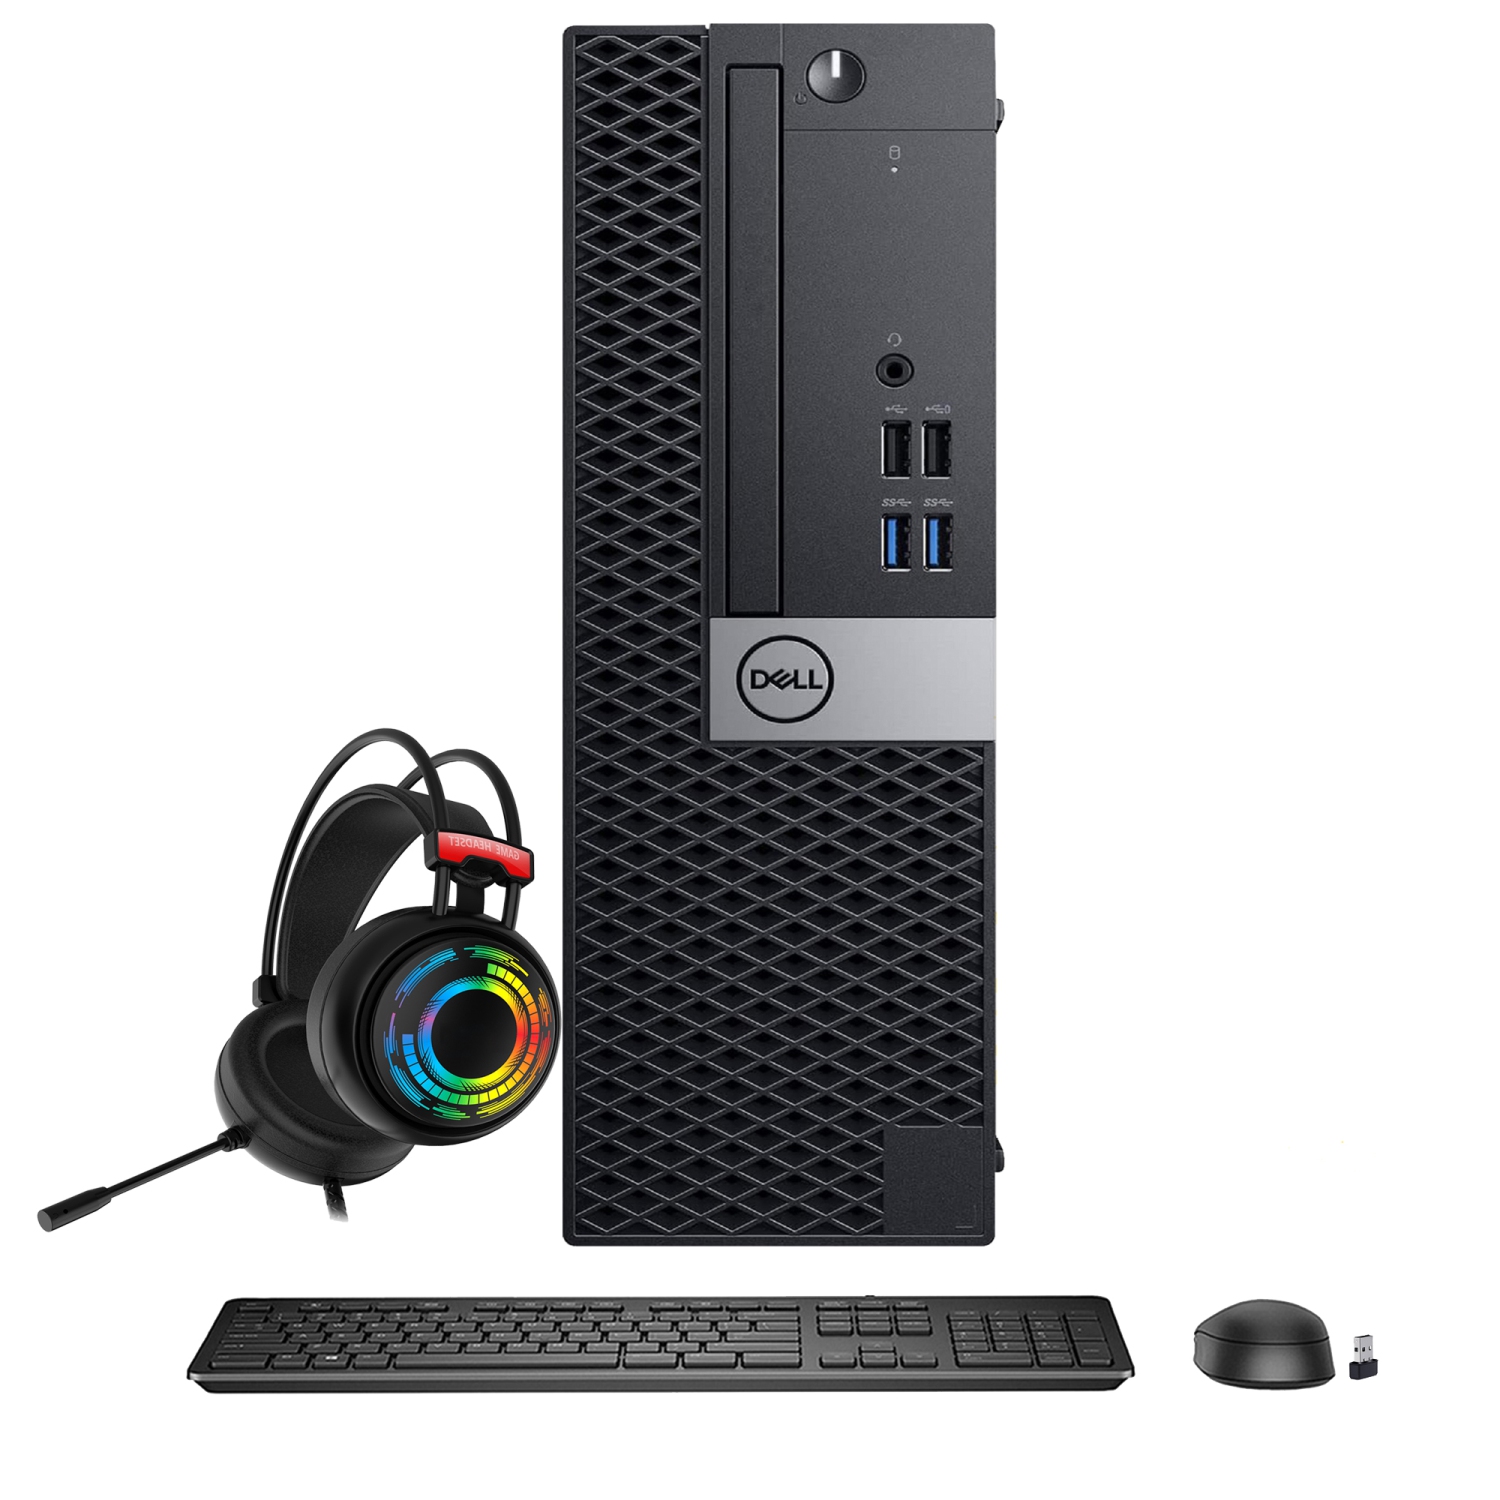 Refurbished (Excellent) - Dell Optiplex 5040 High Performance Desktop Computer Intel Core i5 6500 32GB RAM New 2TB SSD Windows 10 Pro RGB Headset New Wireless Keyboard and Mouse